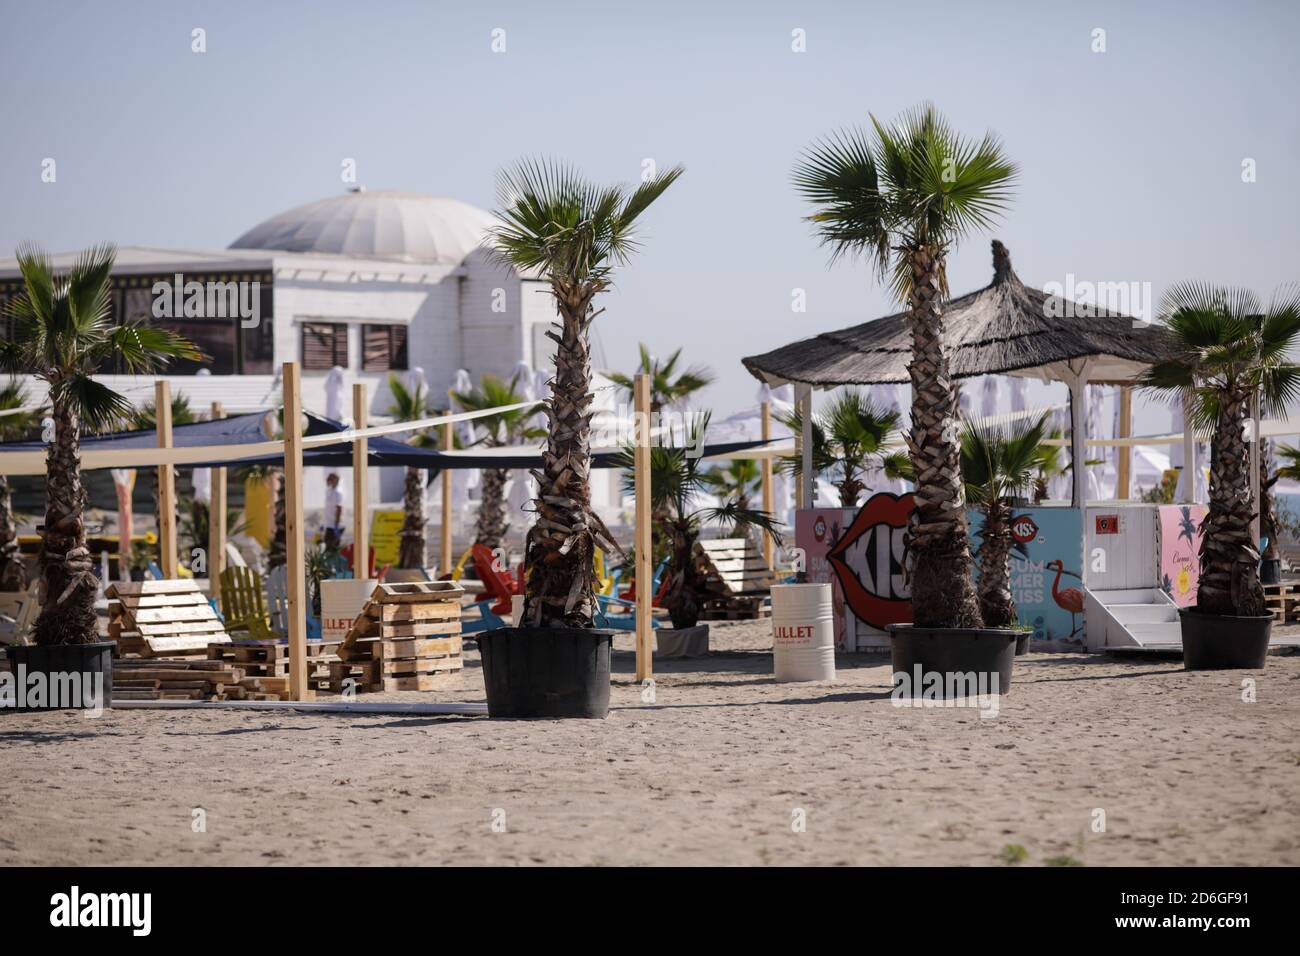 Mamaia, Romania - July 4, 2020: Details from the Mamaia resort on the Black Sea during the Covid-19 outbreak during a summer day morning. Stock Photo